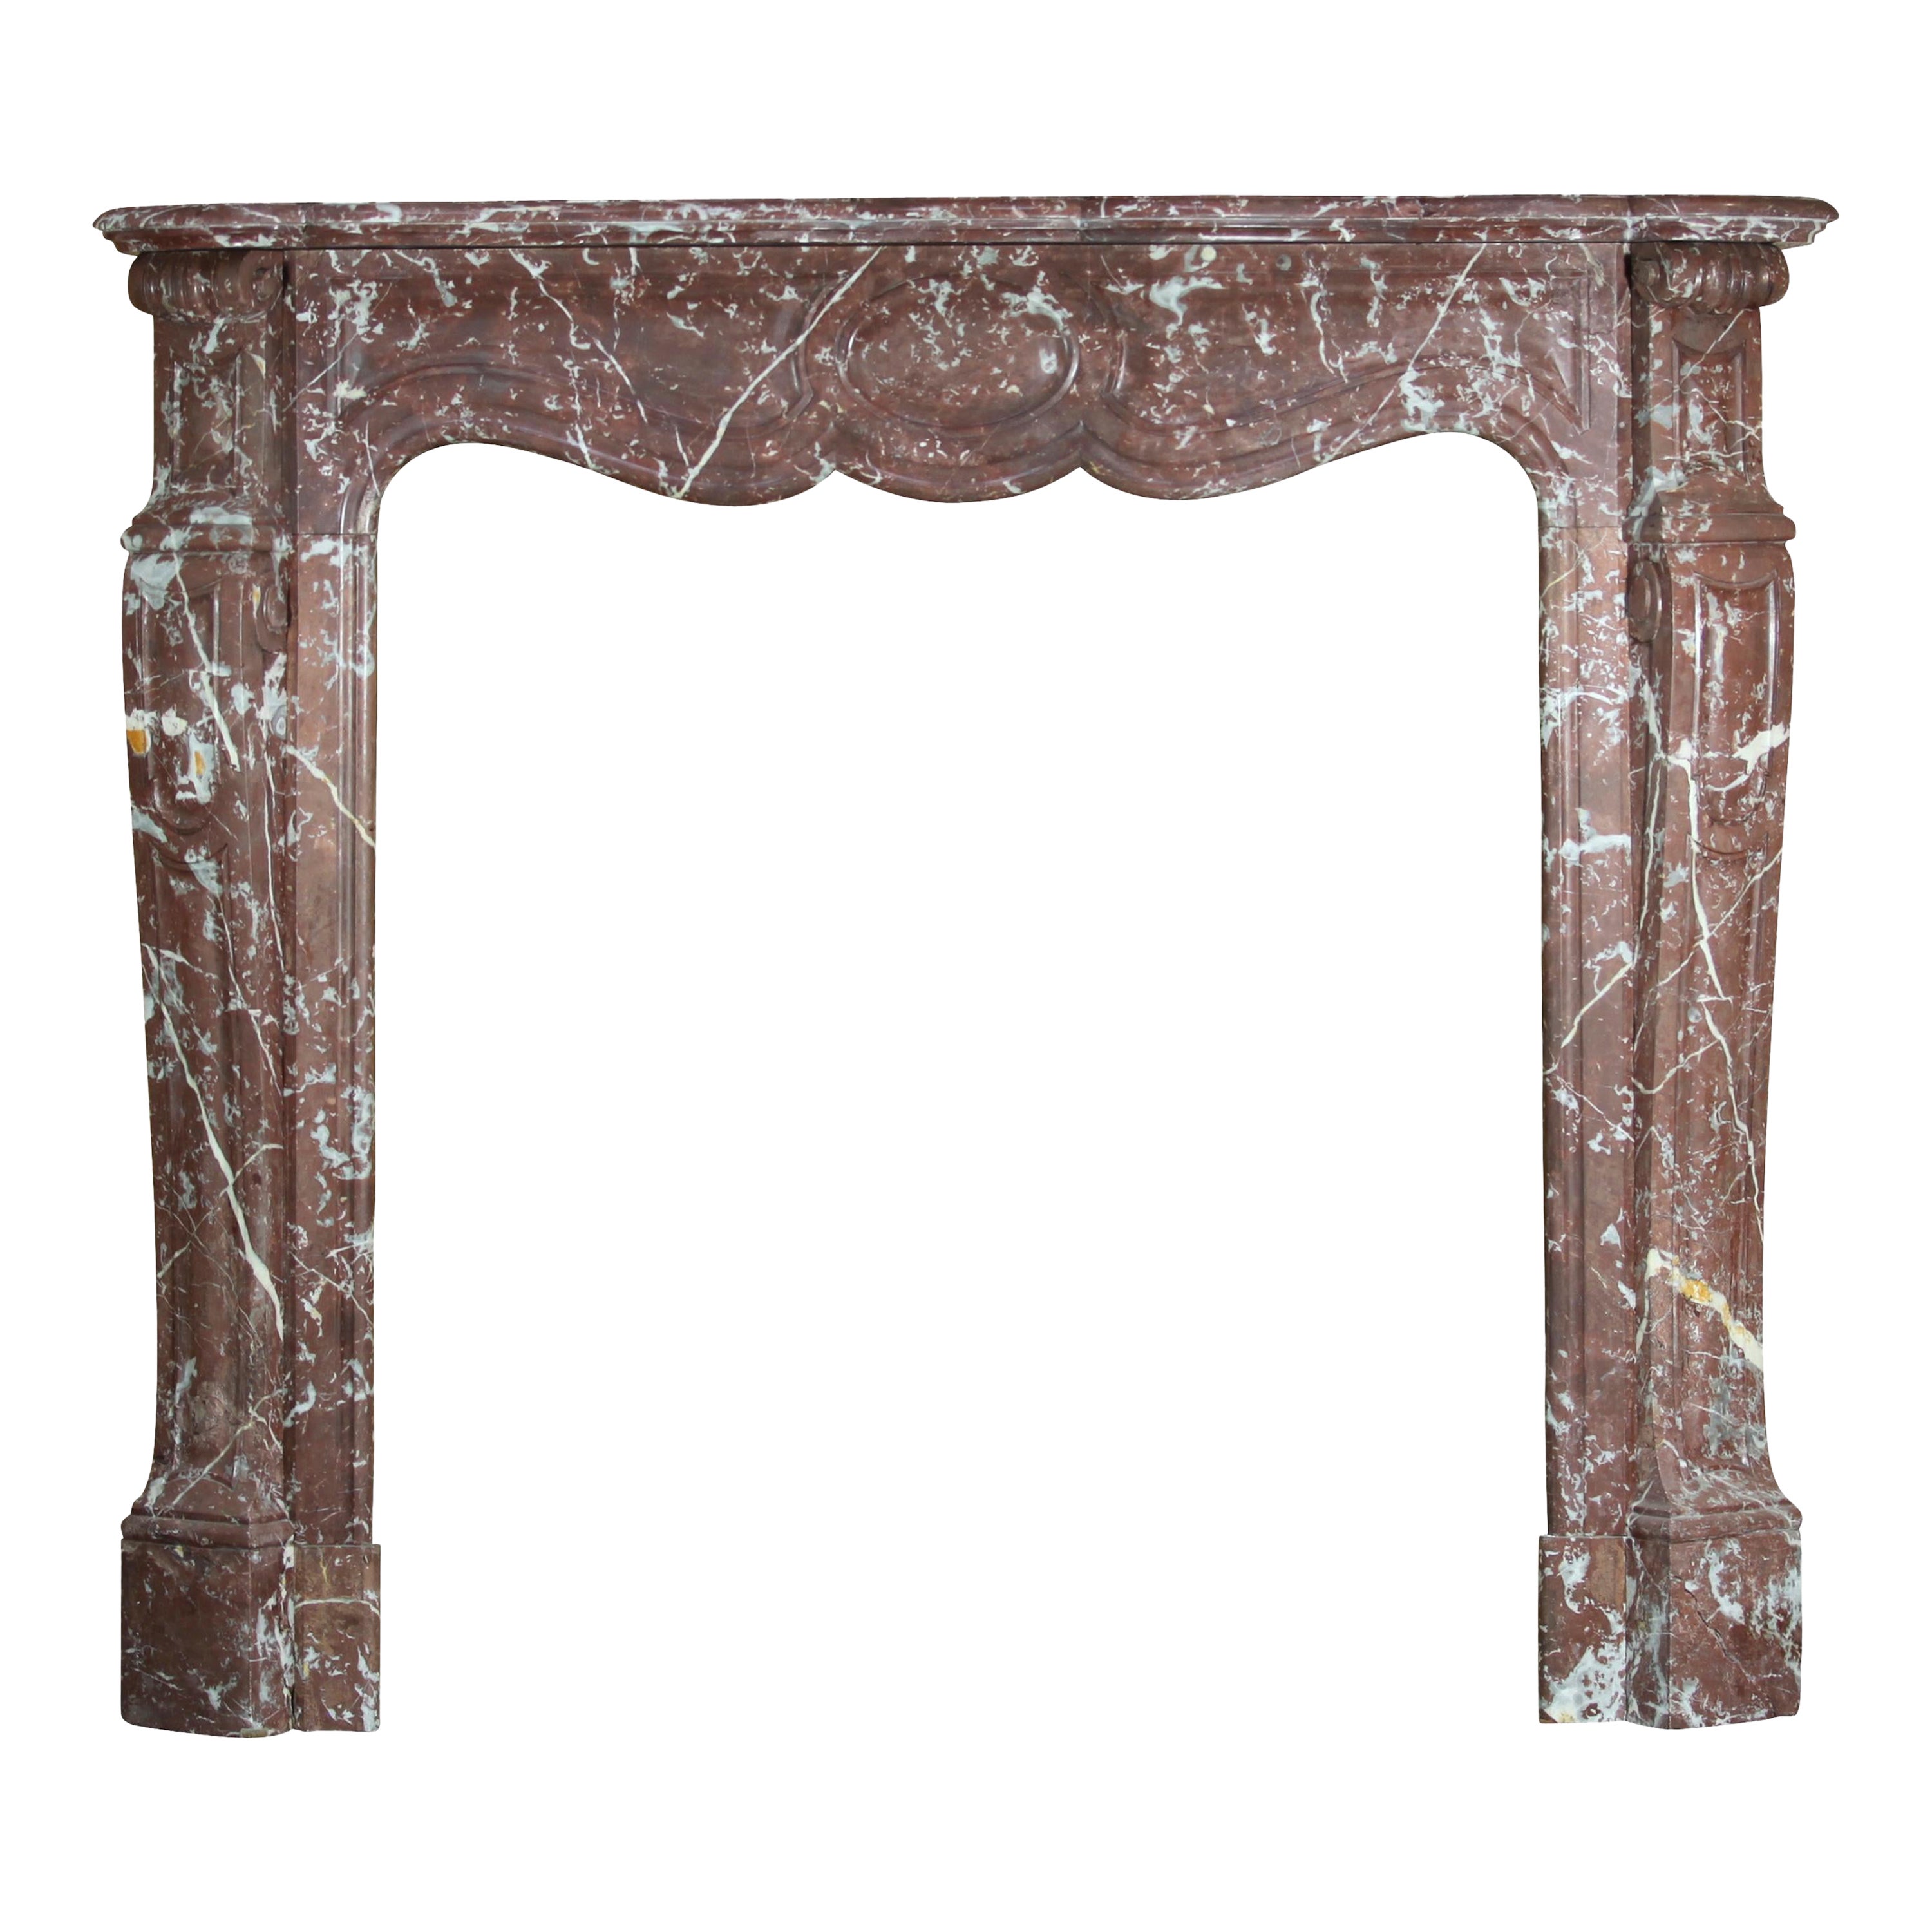 Pompadour Style Classic Belgian Fireplace Surround For Sale